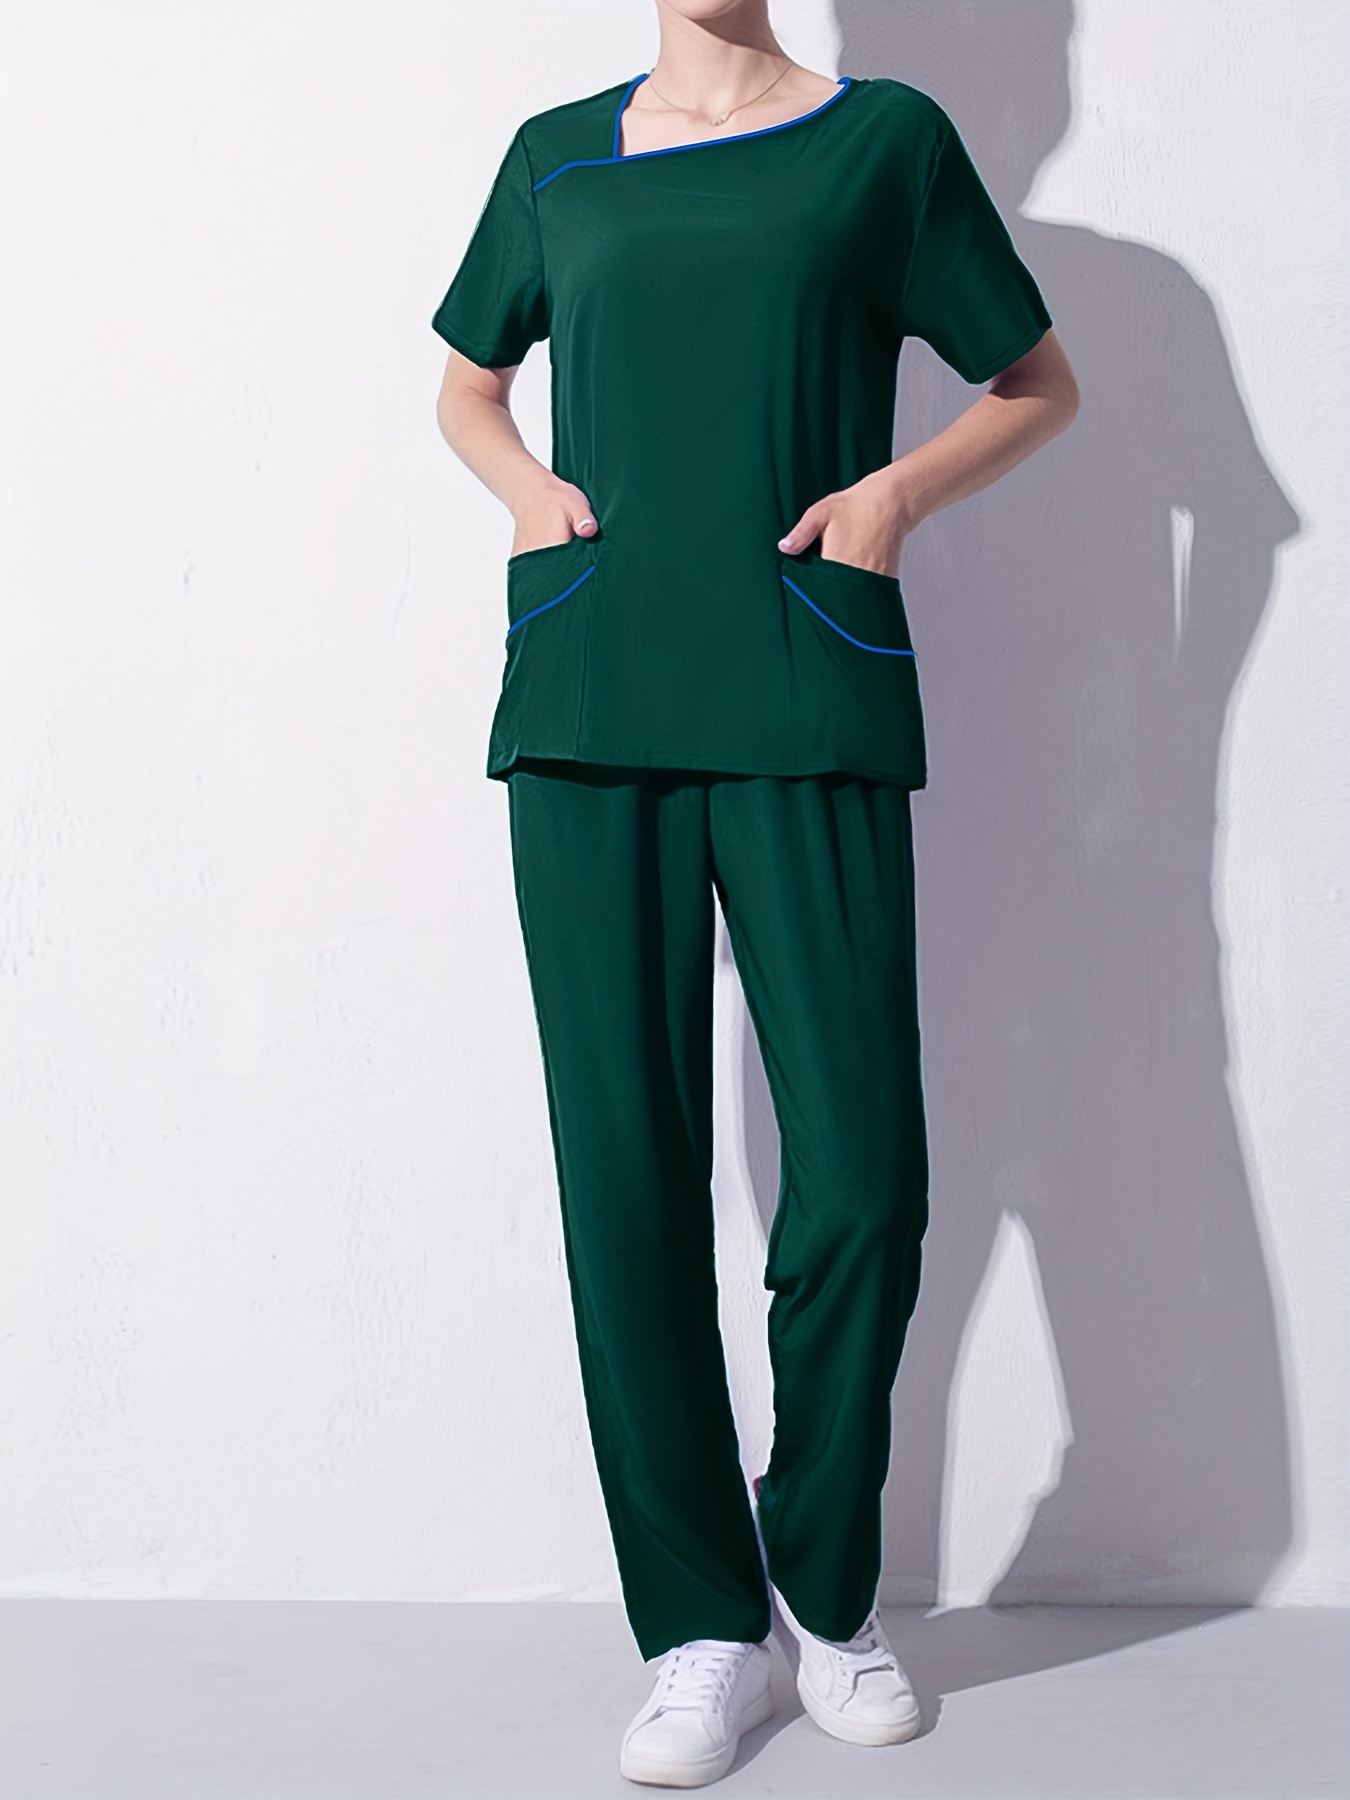 Doctor Dress/ Scrub Suit  Stretchable fabric for better comfort at best  price.